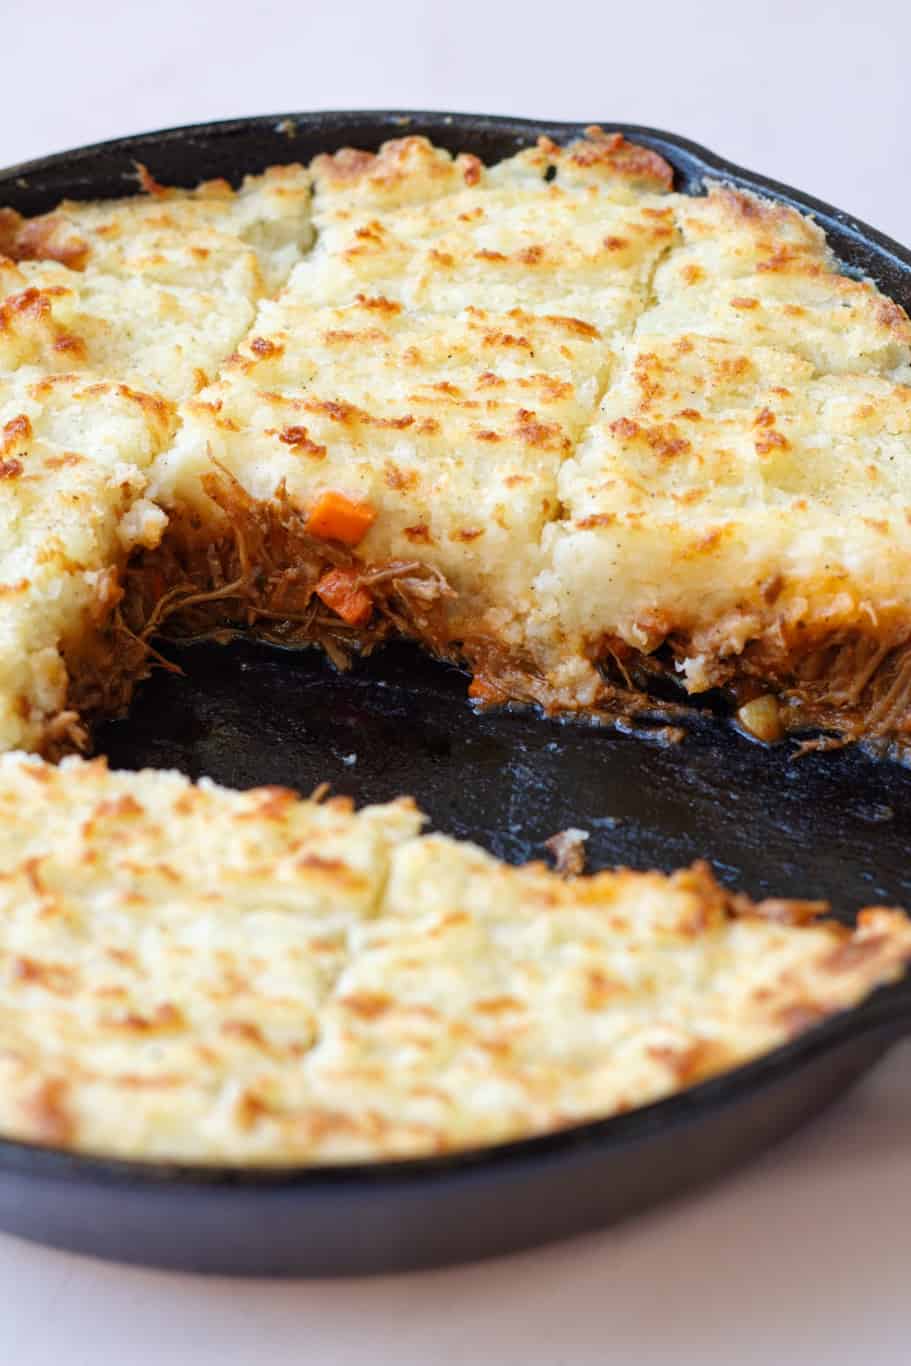 Shepherd's pie made with saucy, deeply flavorful filling, a creamy potato topping, and an awesome golden cheese crust